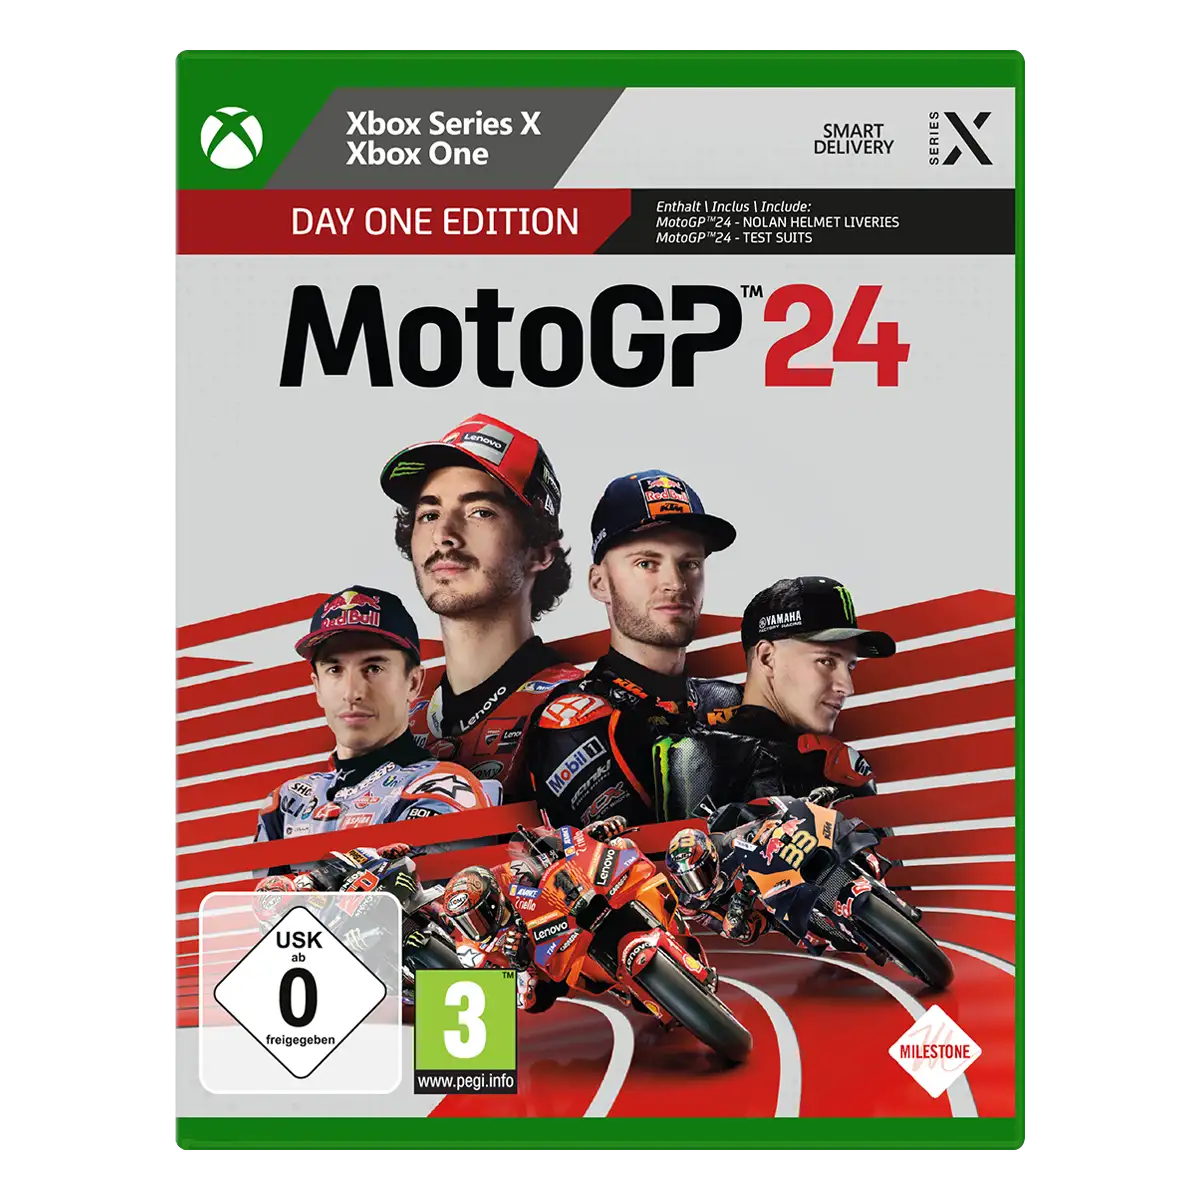 MotoGP 24 Day One Edition (XONE/XSRX) Cover